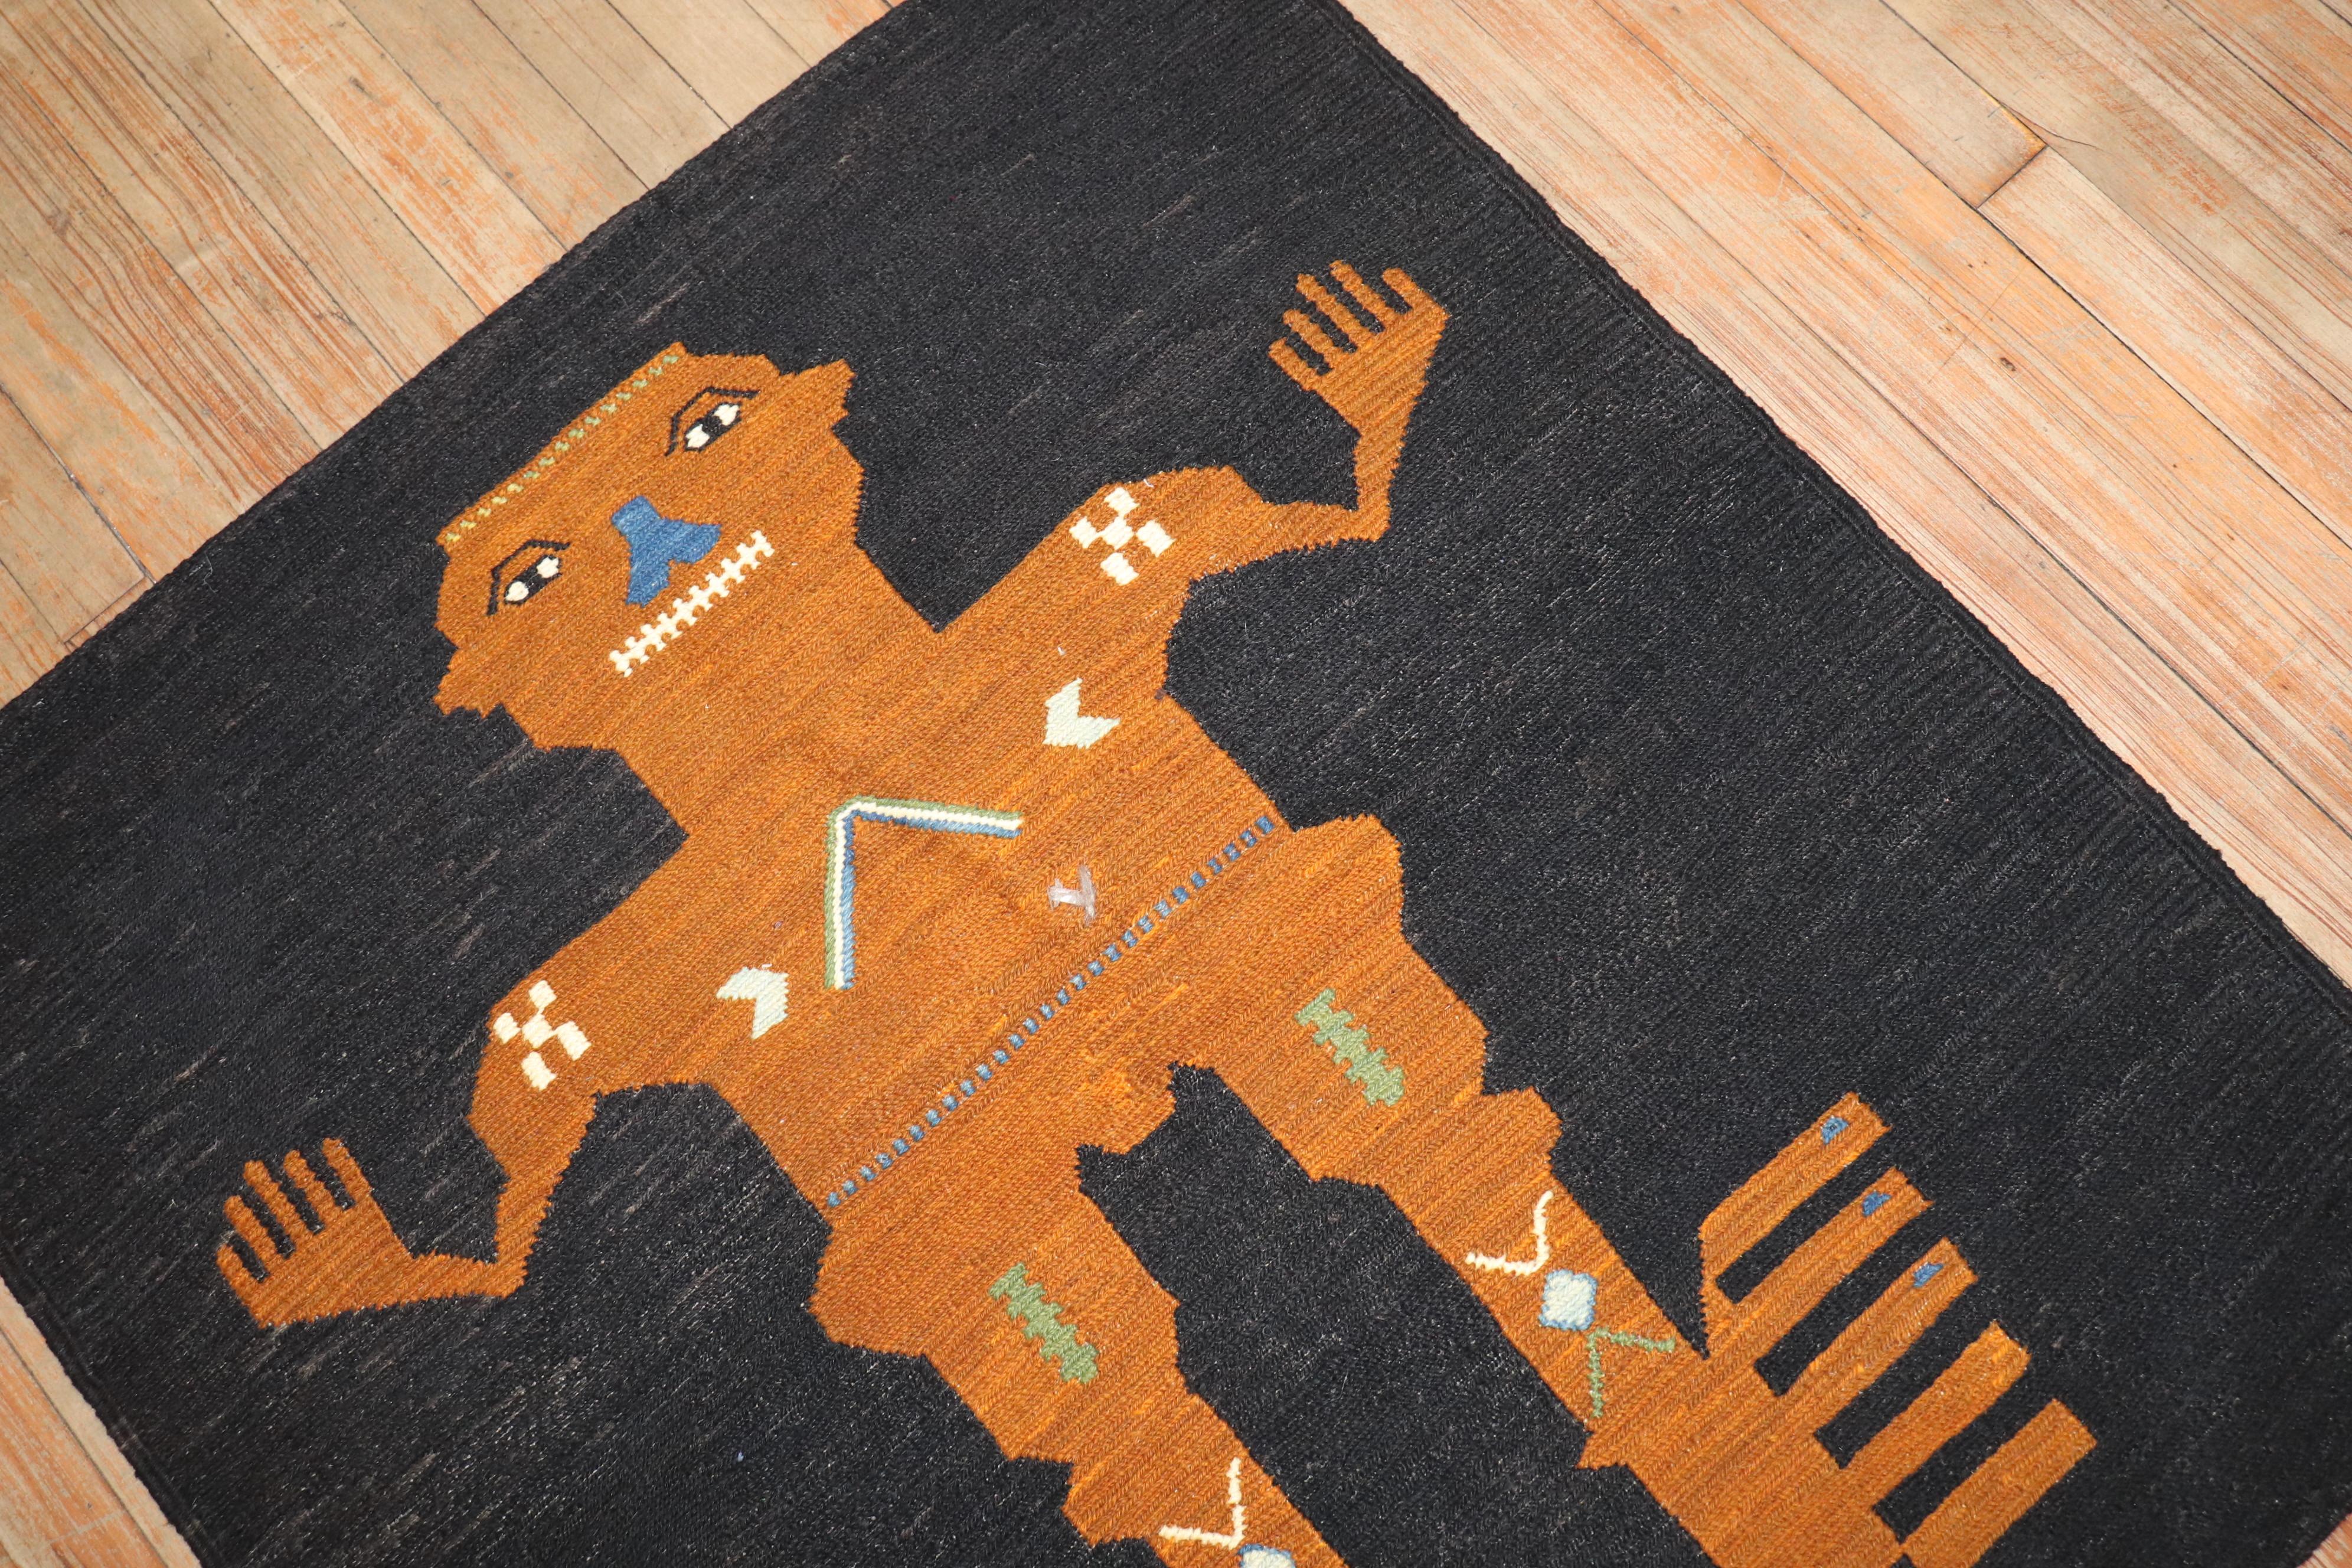 Square scatter-size persian soumac kilim from the late 20th century with a Frankenstein like figure on a dark ground

Measures: 3'2'' x 3'6''.

This was originally belonging to a private Persian collector who requested to make a custom collection of